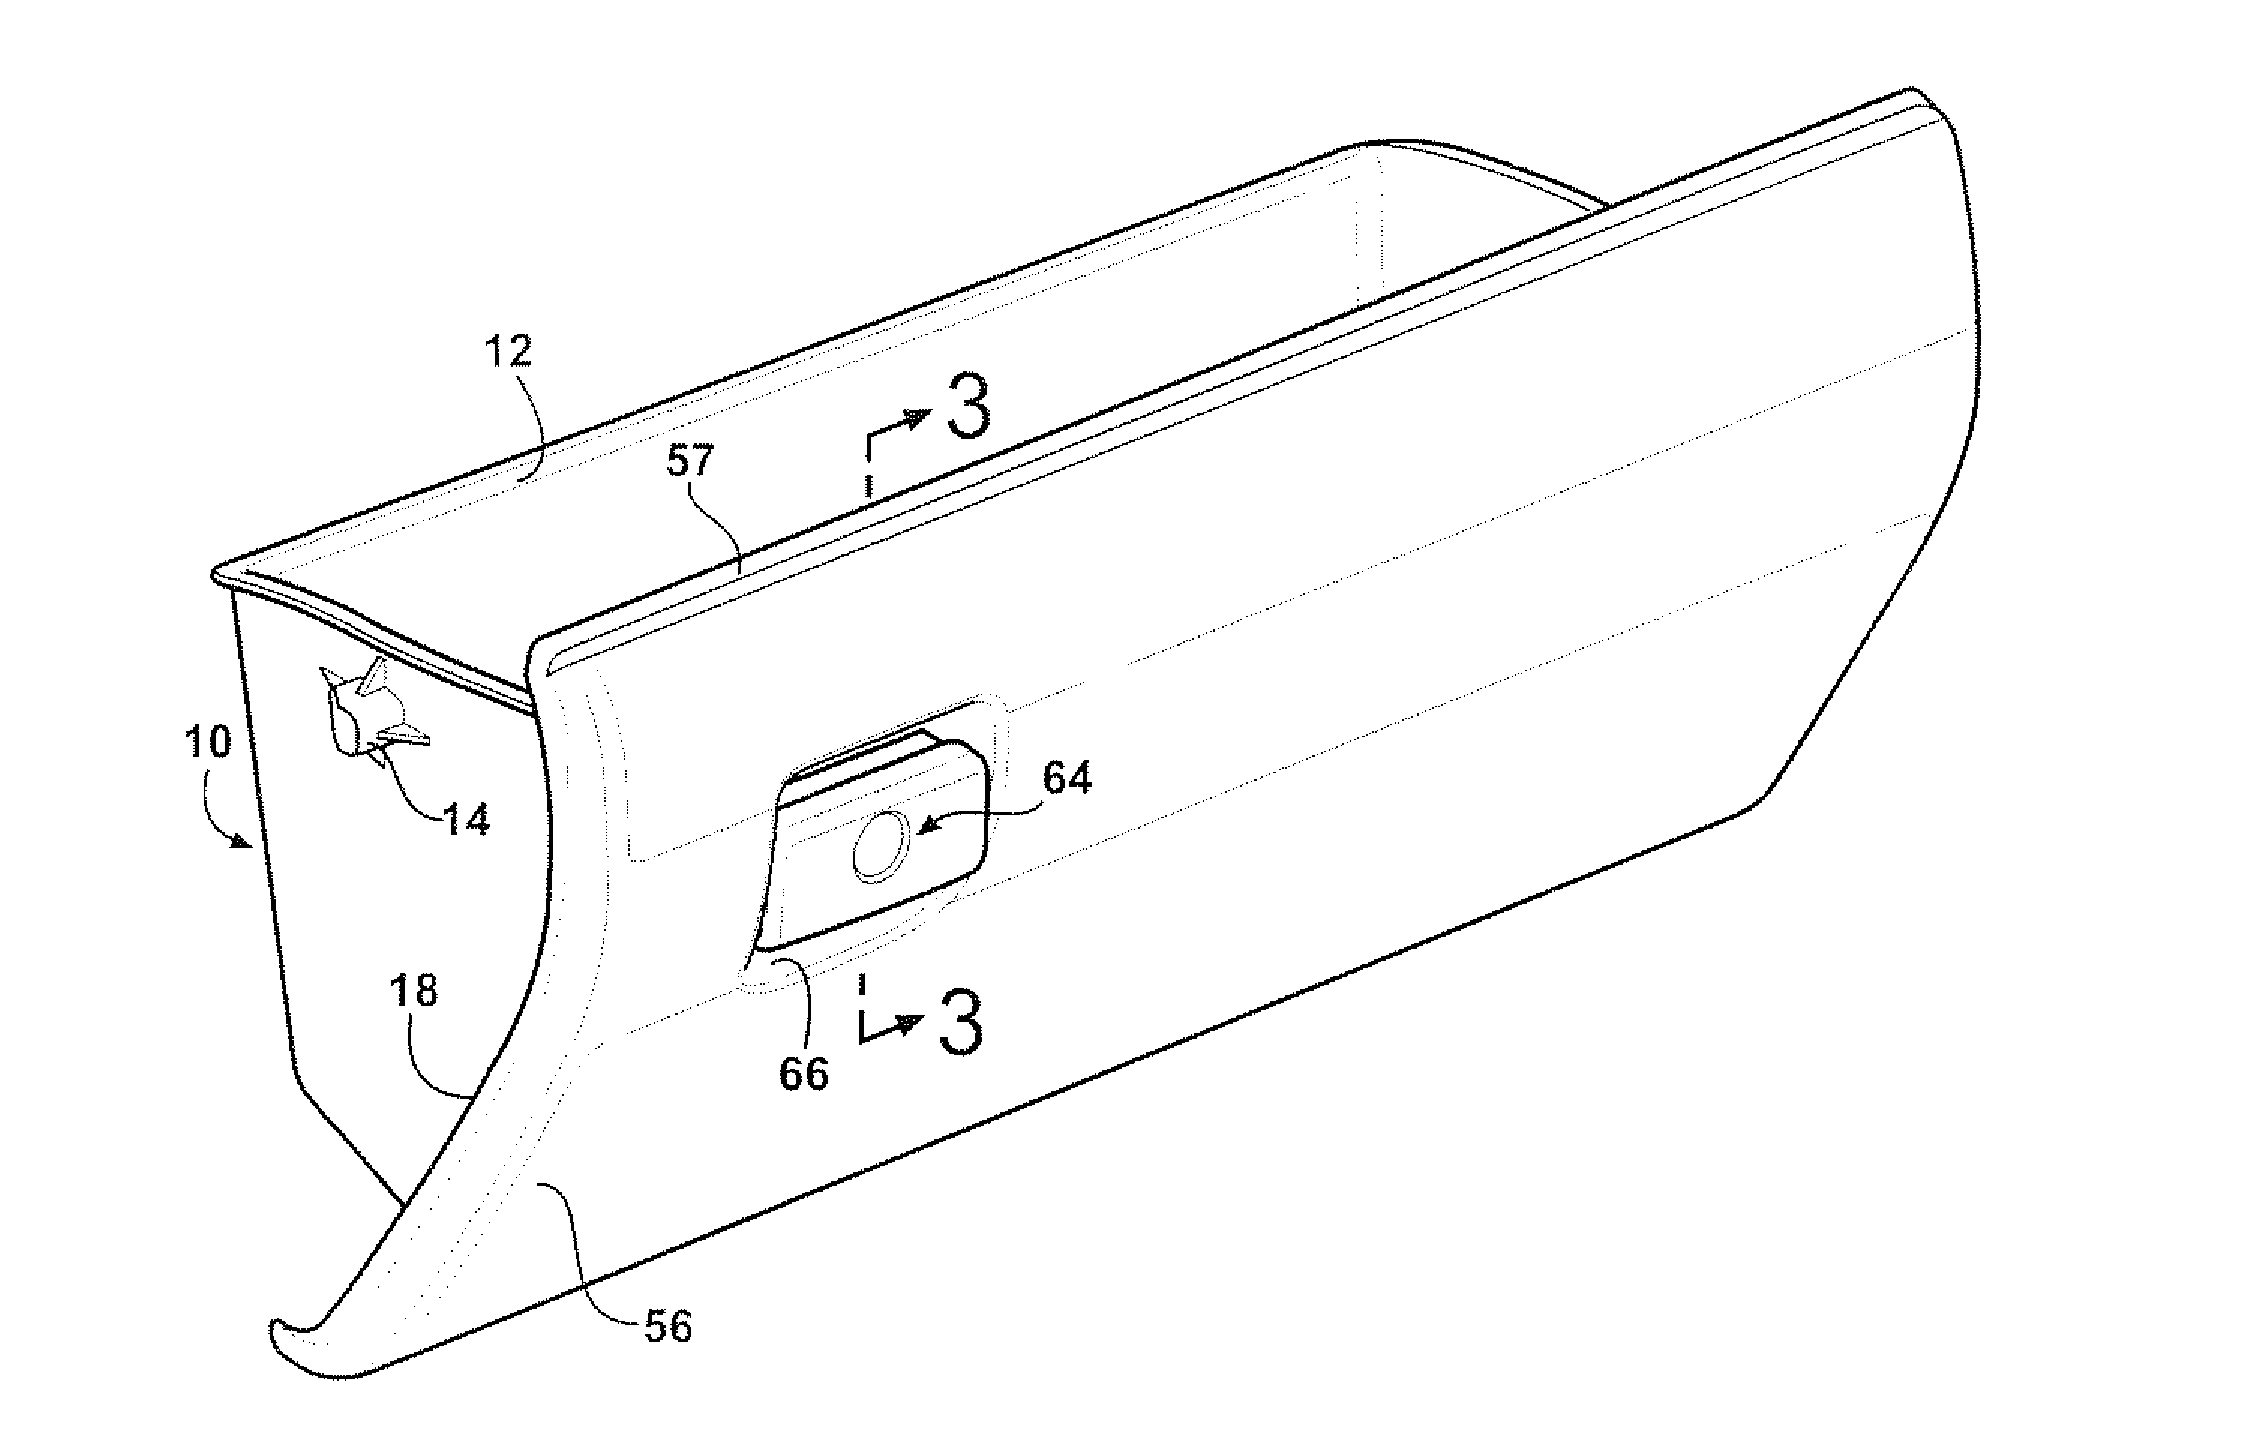 Reinforcing support incorporated into a glove box retaining structure located proximate a pivot actuating handle mechanism